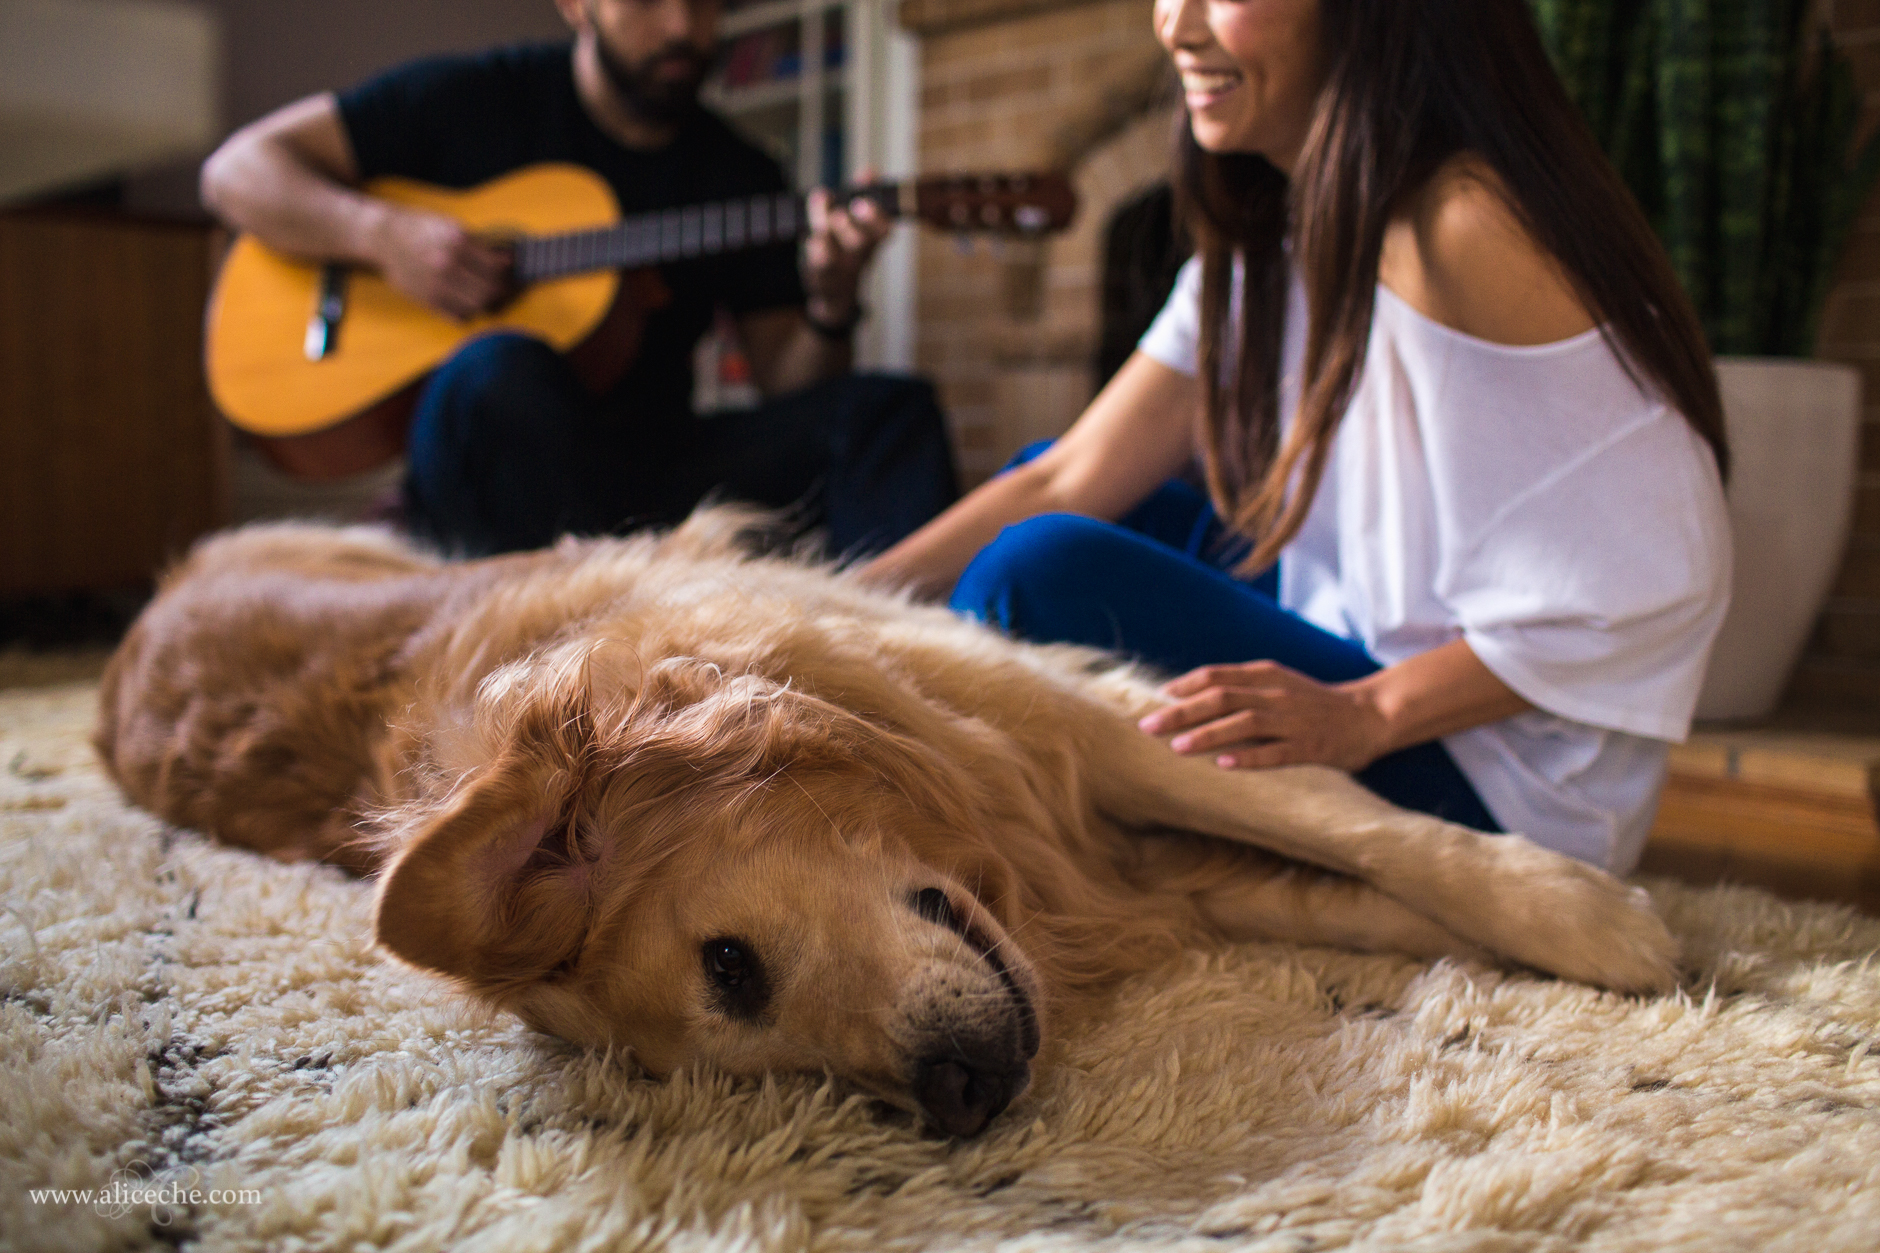 alice-che-photography-8-reasons-to-have-an-in-home-engagement-session-bay-area-golden-retriever